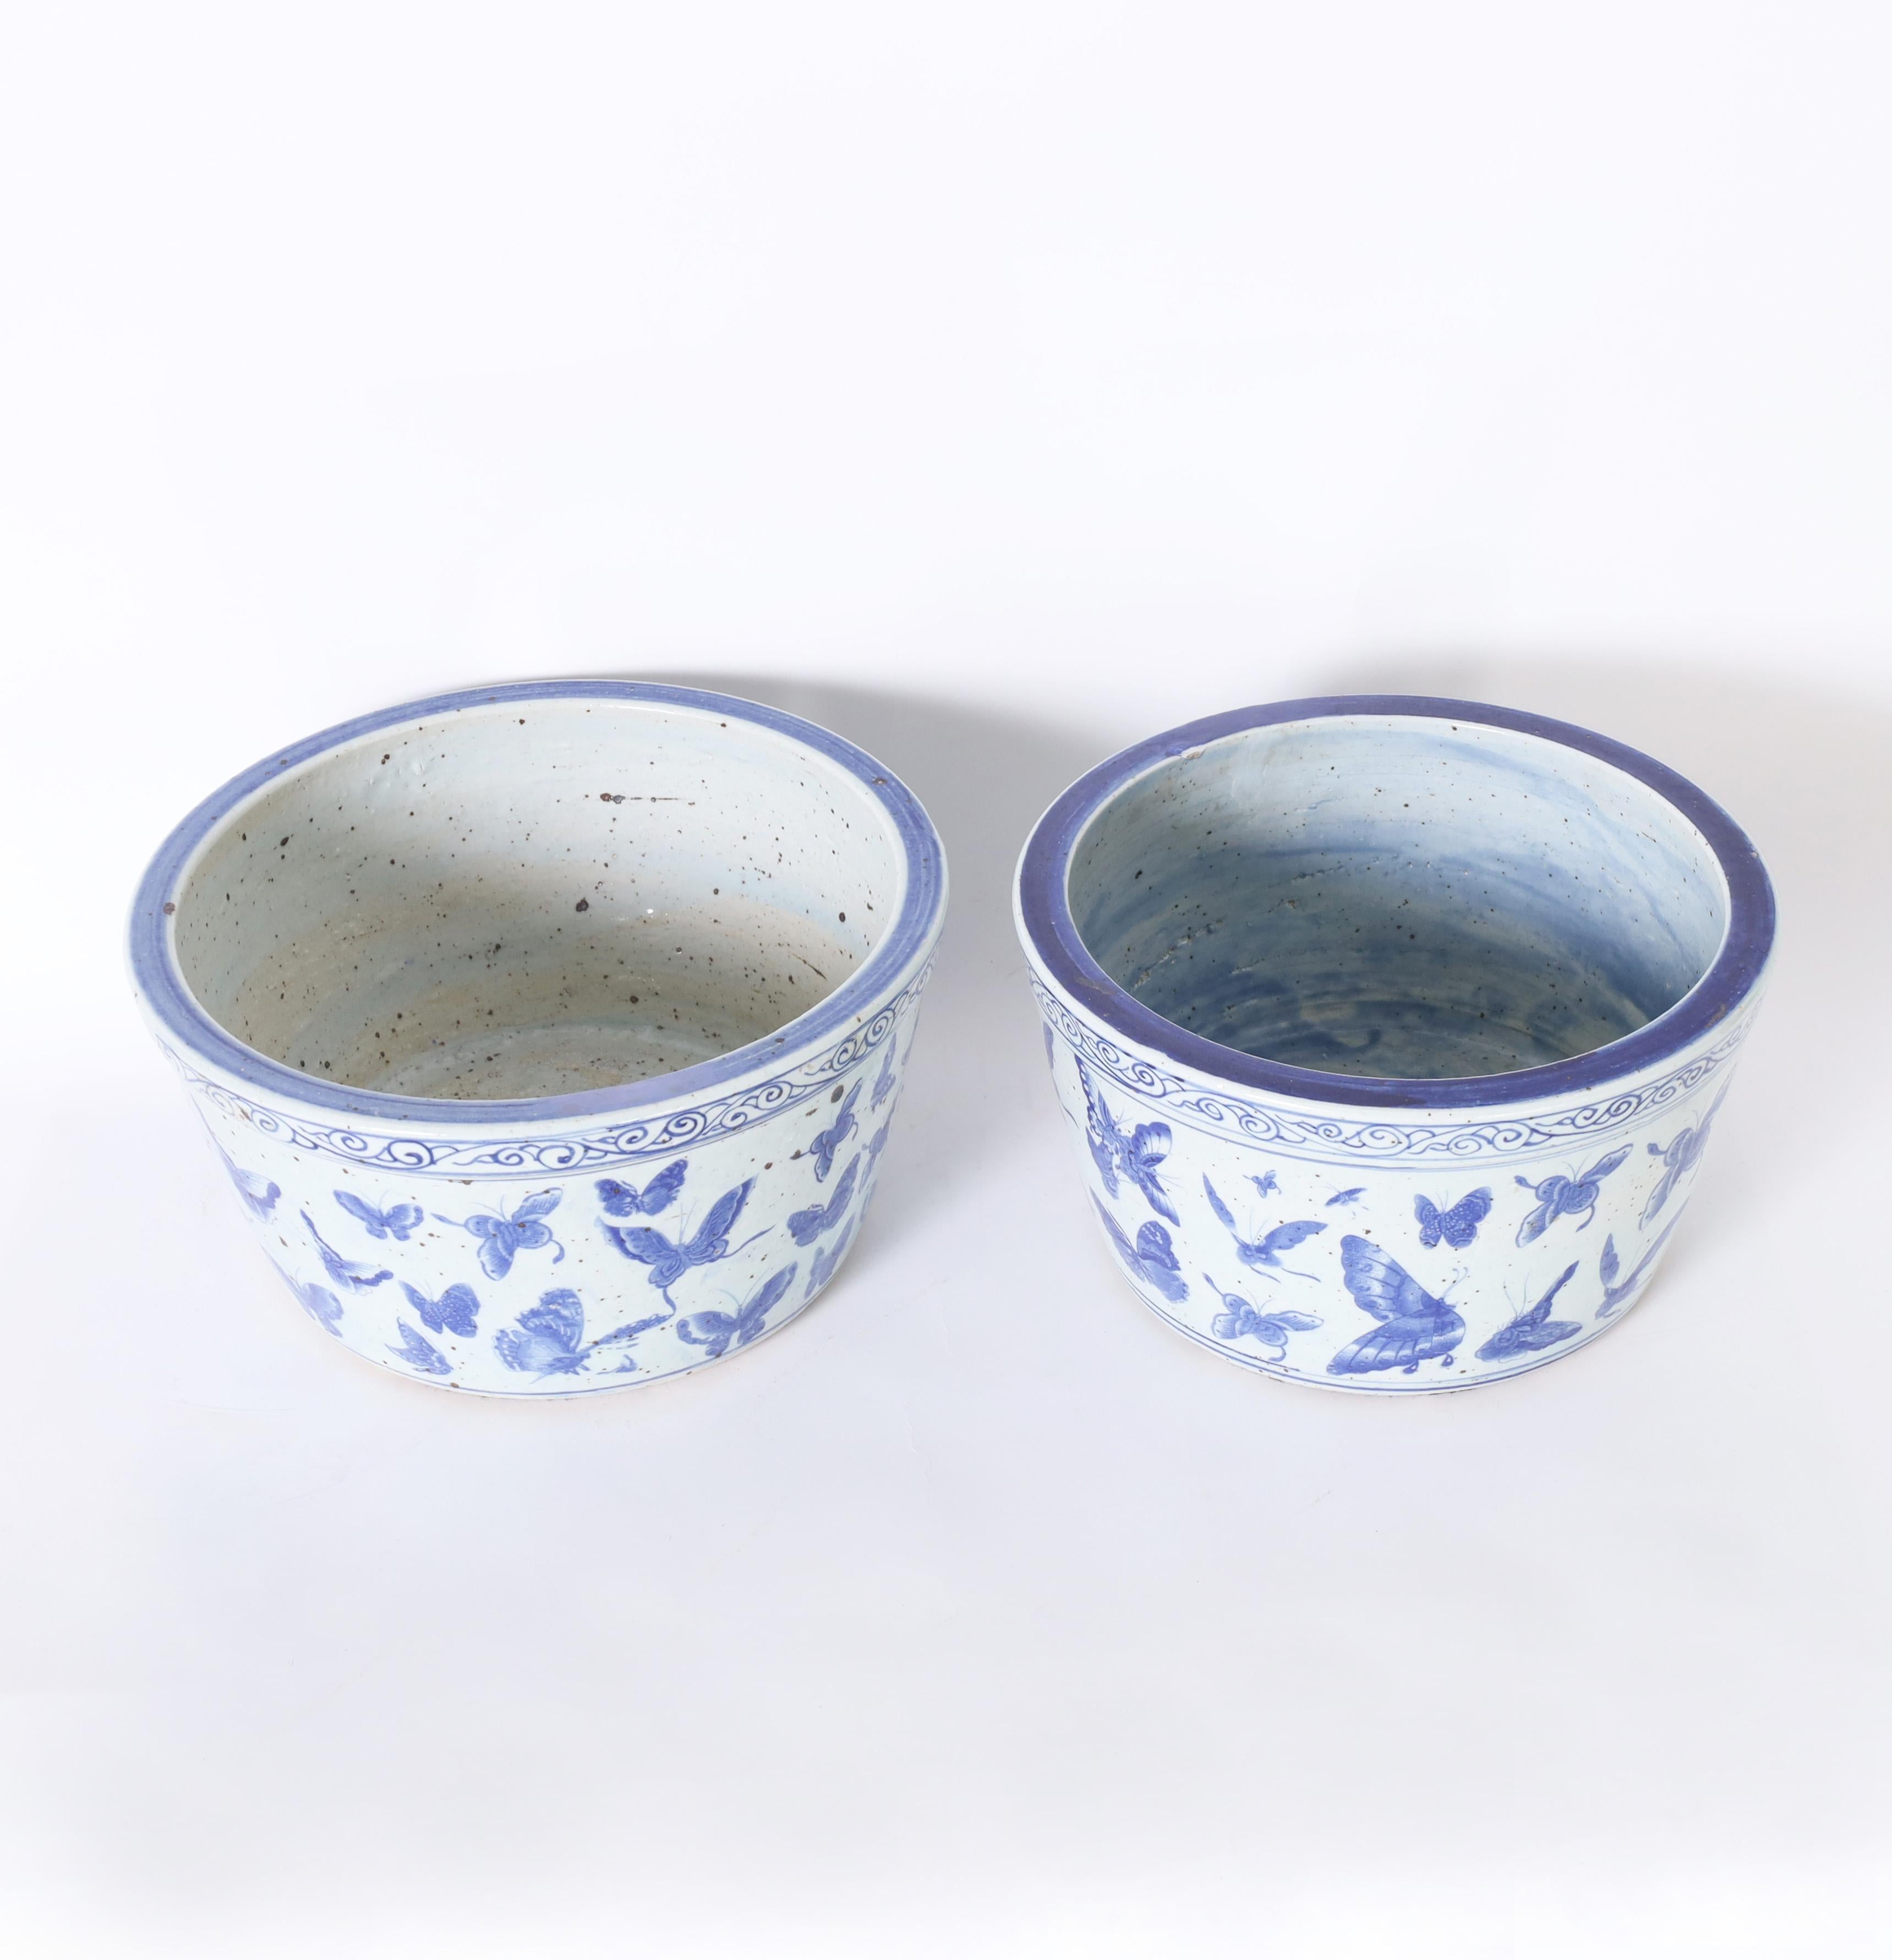 Charming pair of Chinese blue and white porcelain bowls hand decorated with butterflies and moths, perfect for orchid arrangements. 